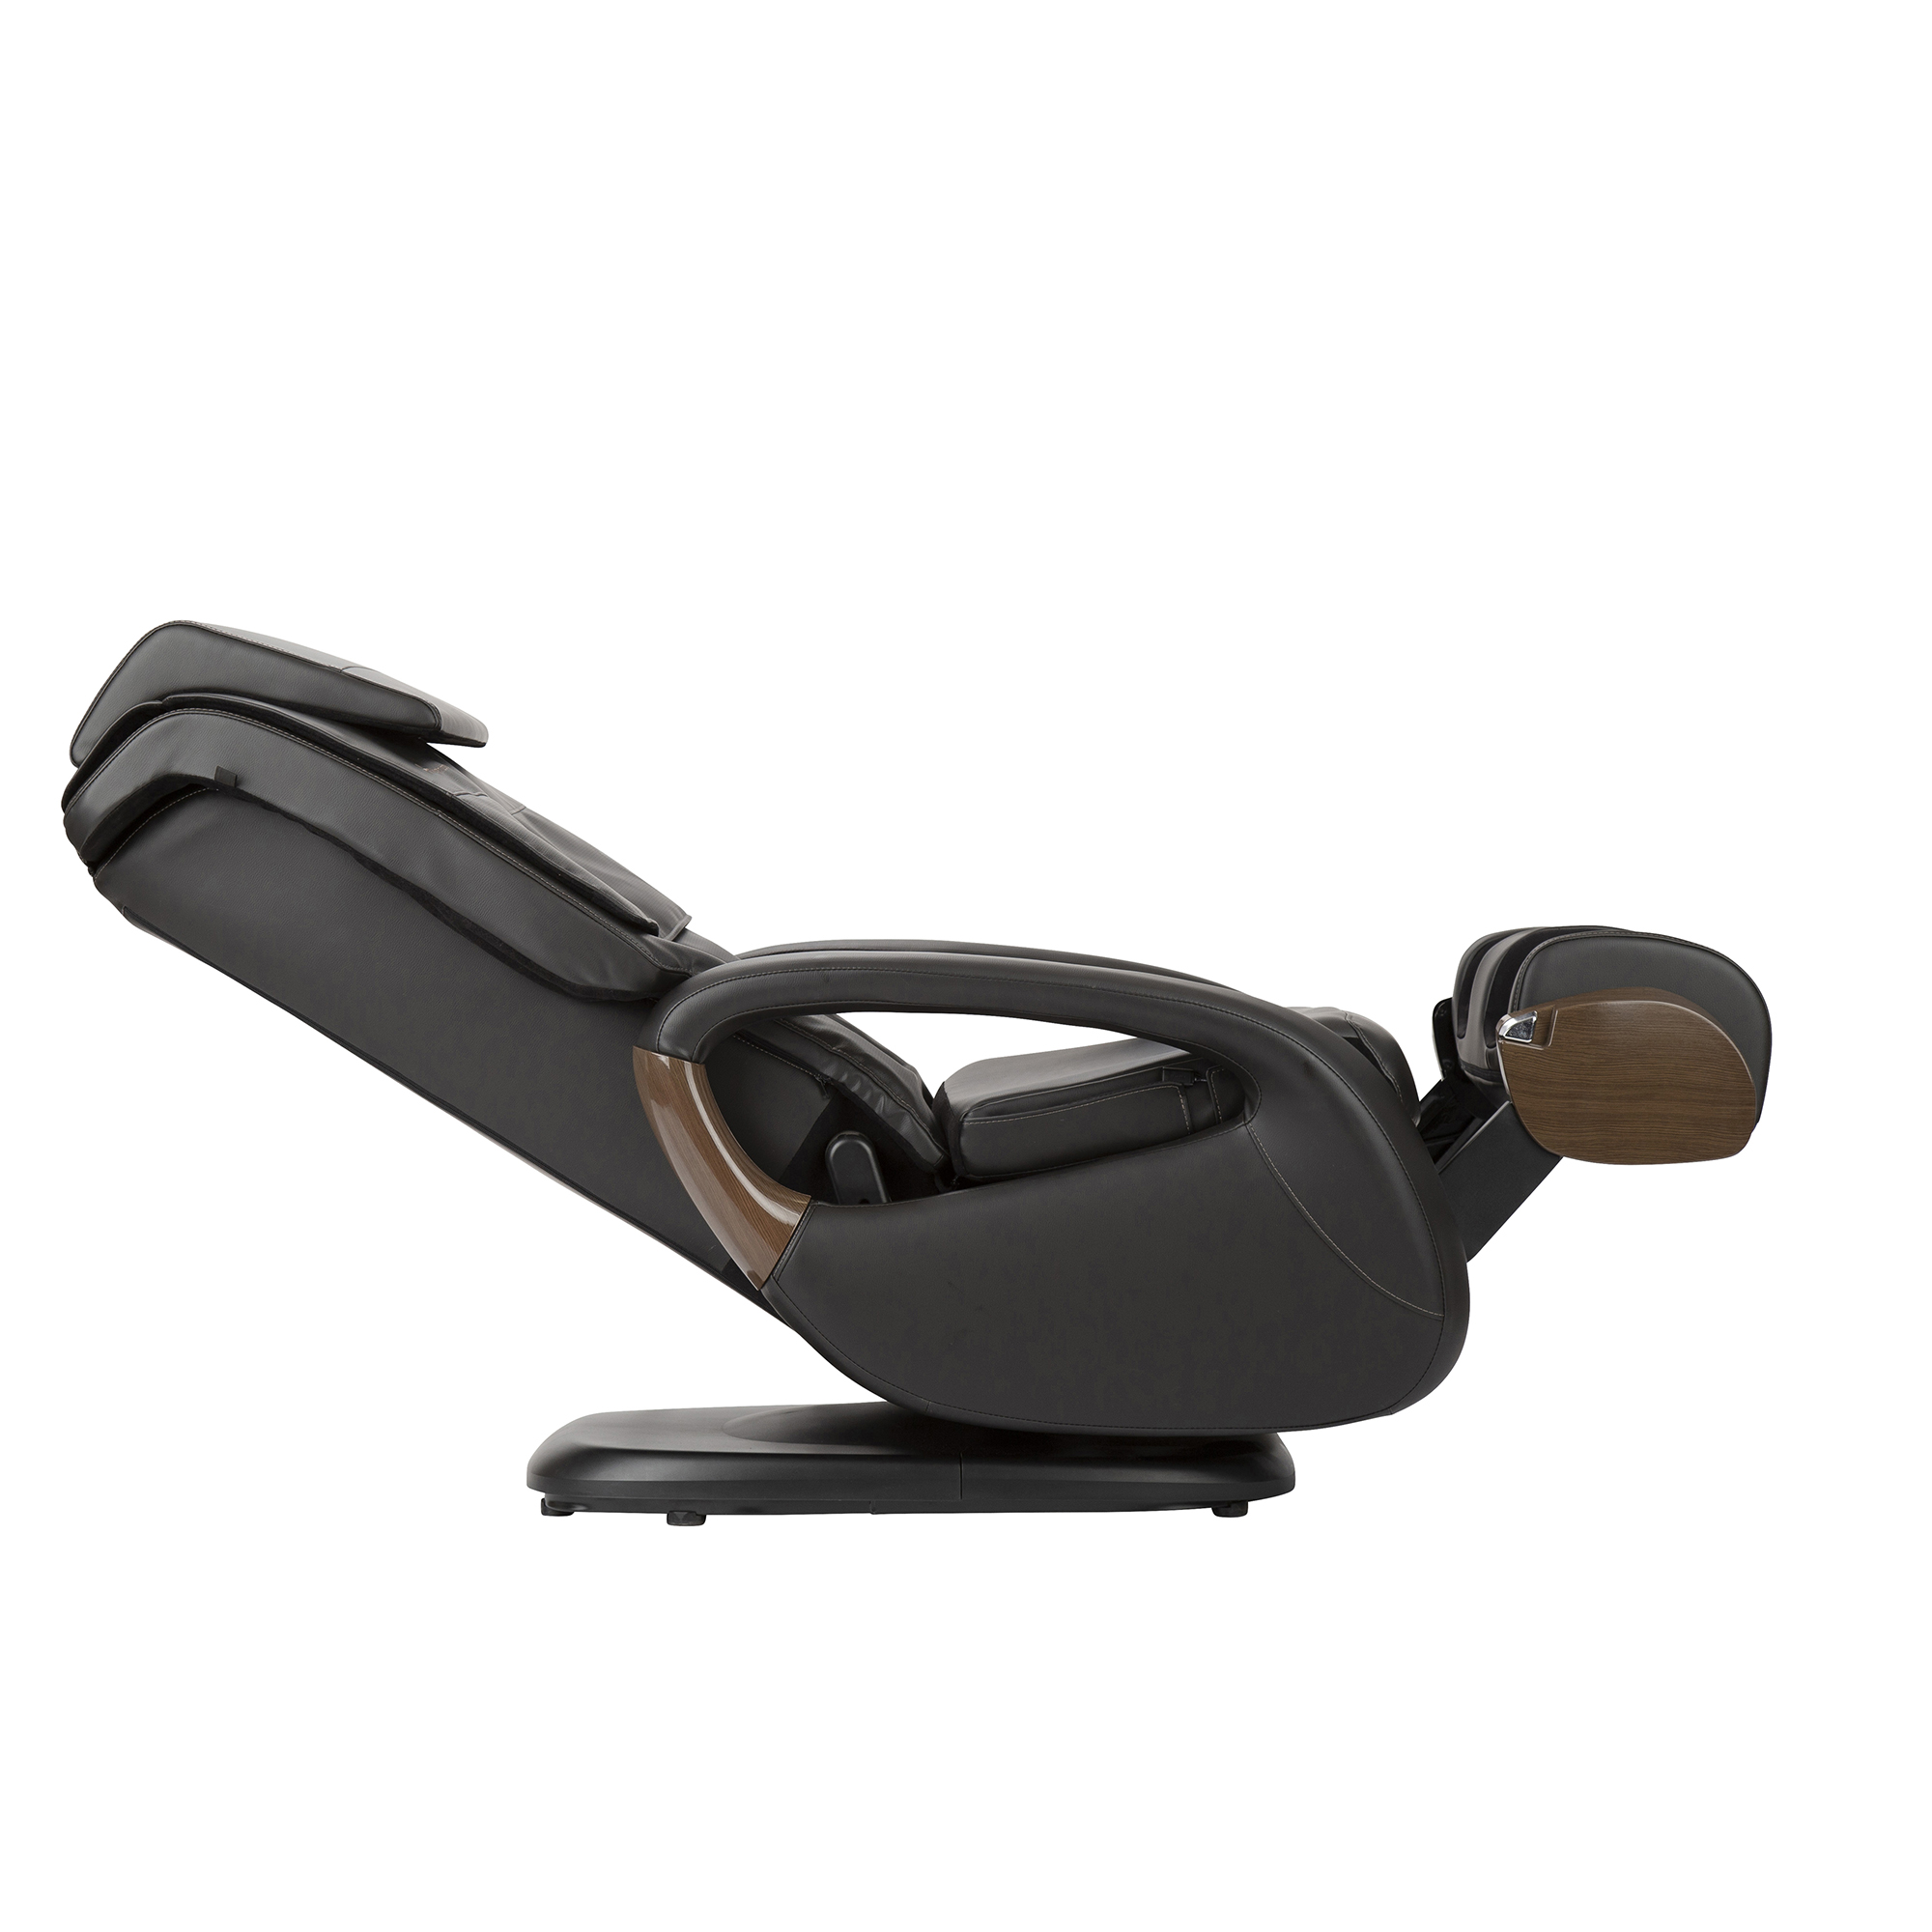 WB-8.0_Charcoal_Profile_Reclined_Massager-Up_2000x2000.jpg